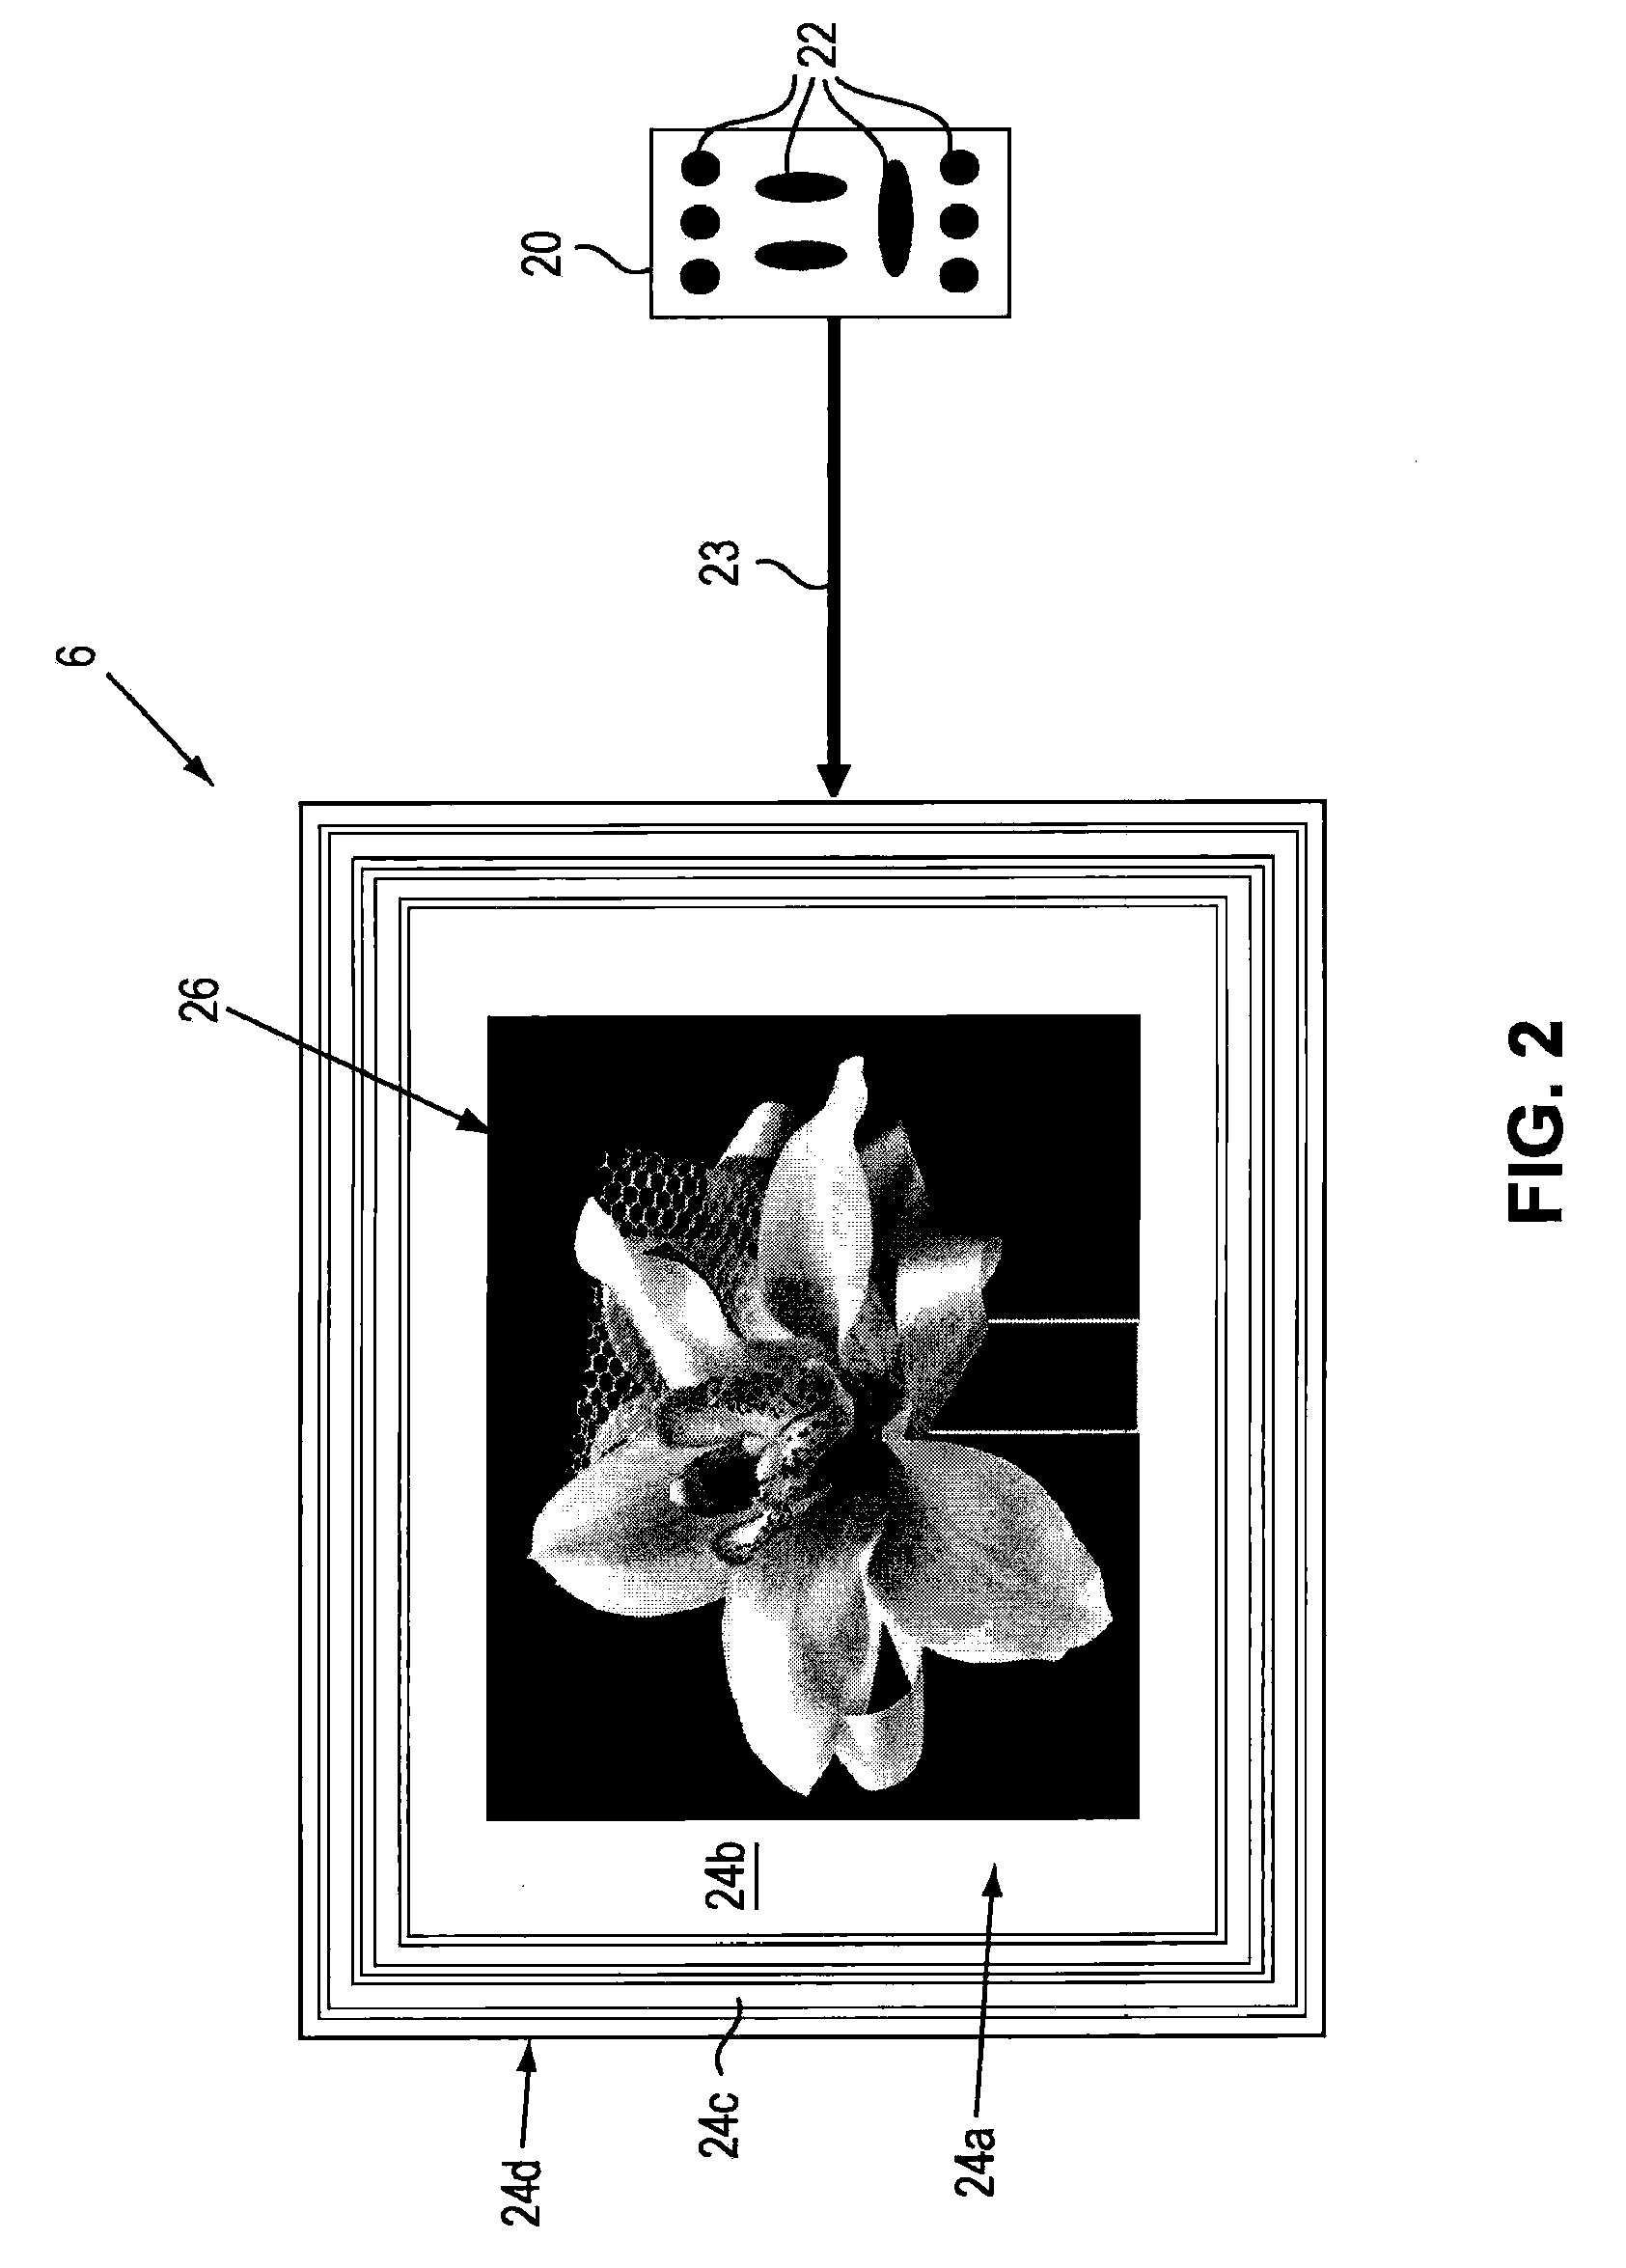 Digital picture frame device and system